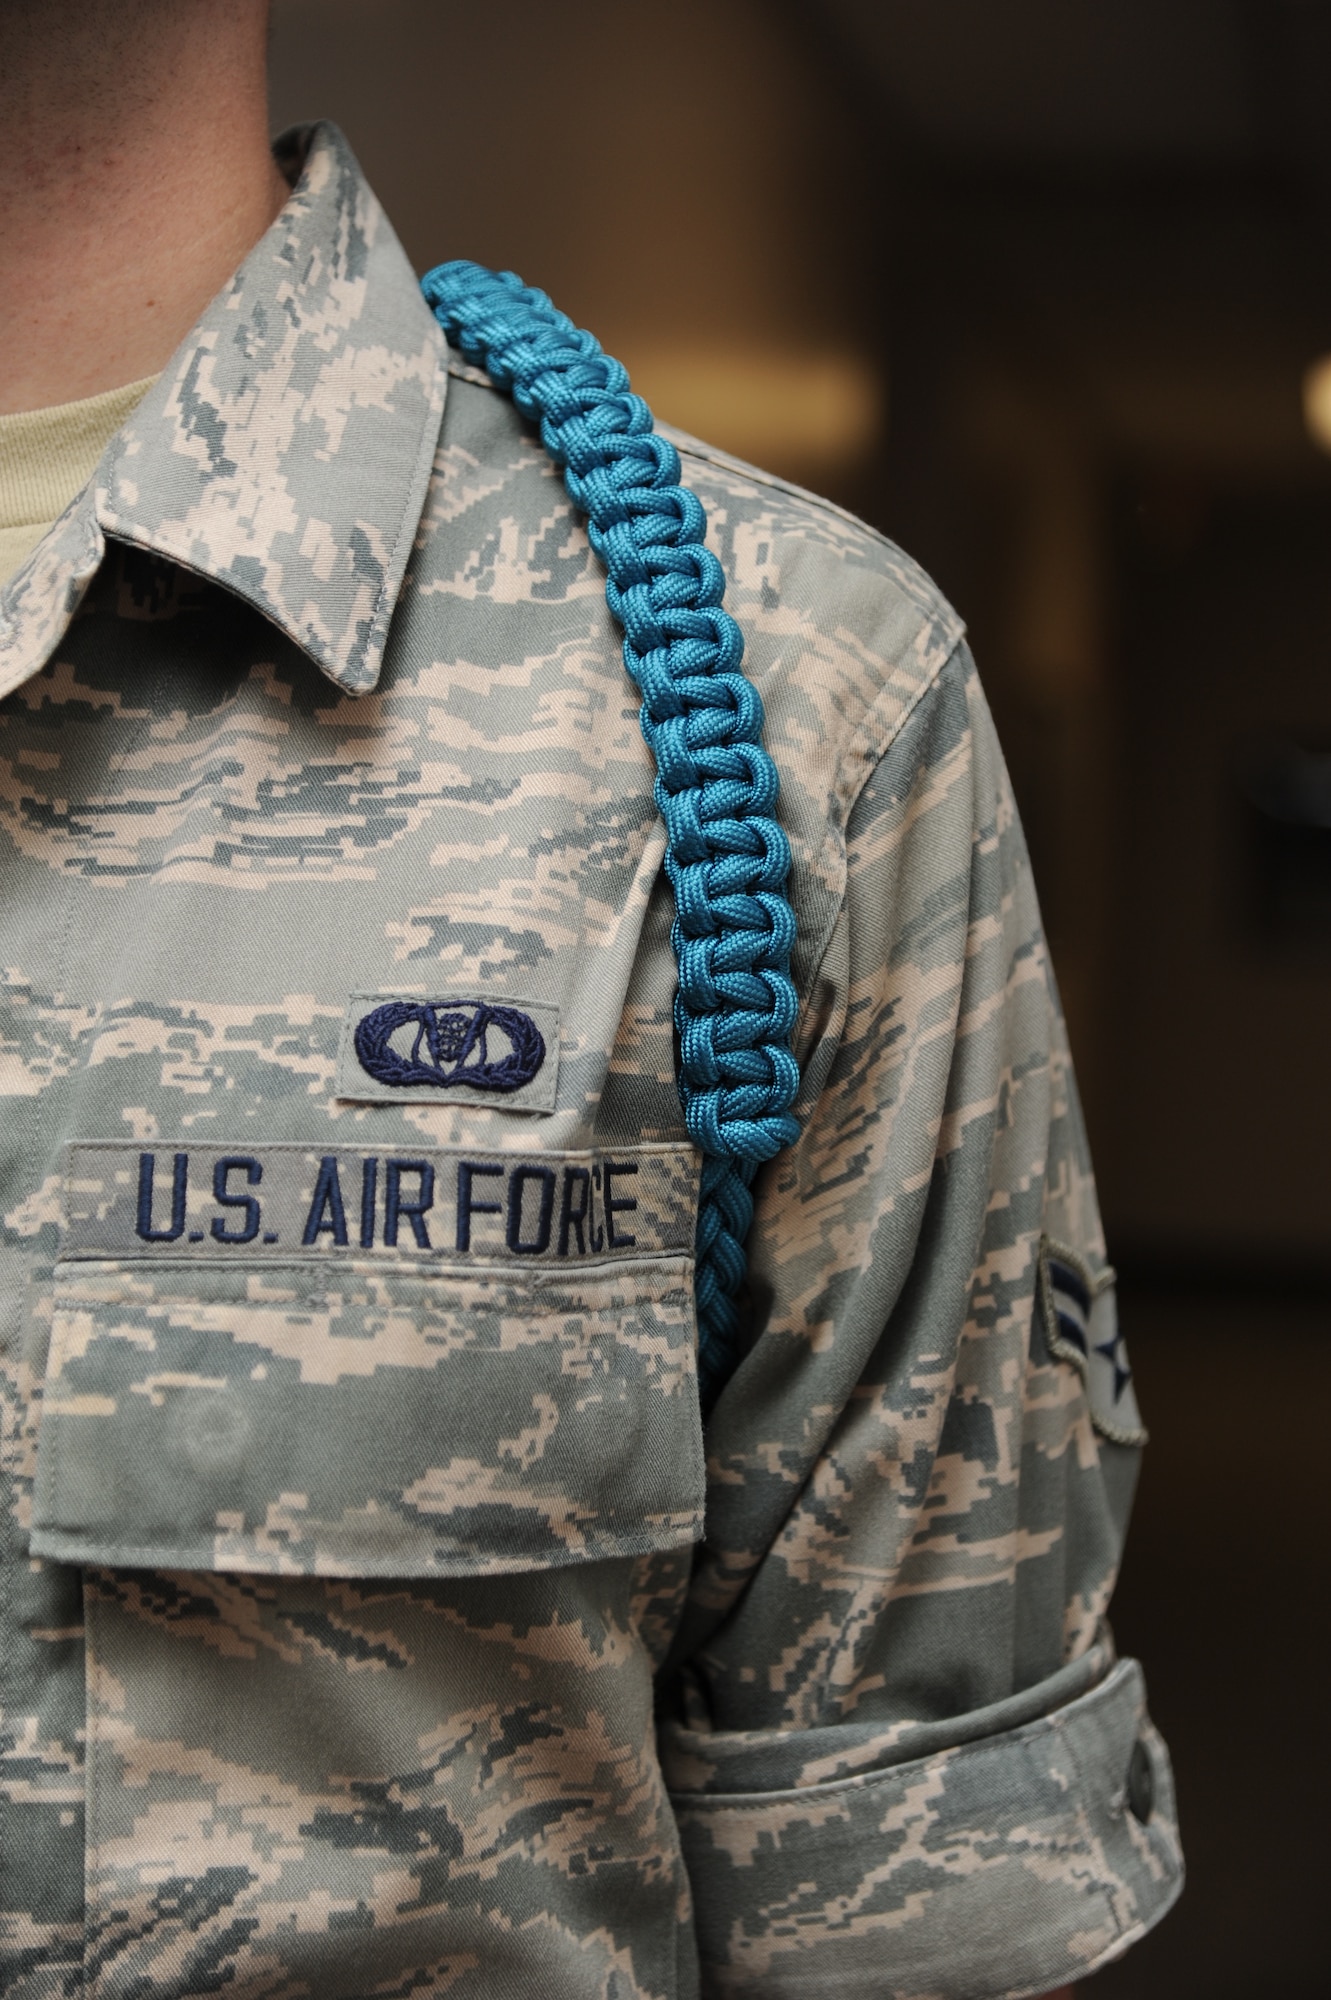 Select airmen will begin wearing teal ropes, which symbolizes sexual assault awareness and support, during the month of October within the student population at Keesler Air Force Base, Miss. Teal Rope members receive specialized training by the sexual assault prevention and response office staff and serve as a link between non-prior service students and SAPRO for information and referral support.  (U.S. Air Force photo by Kemberly Groue)